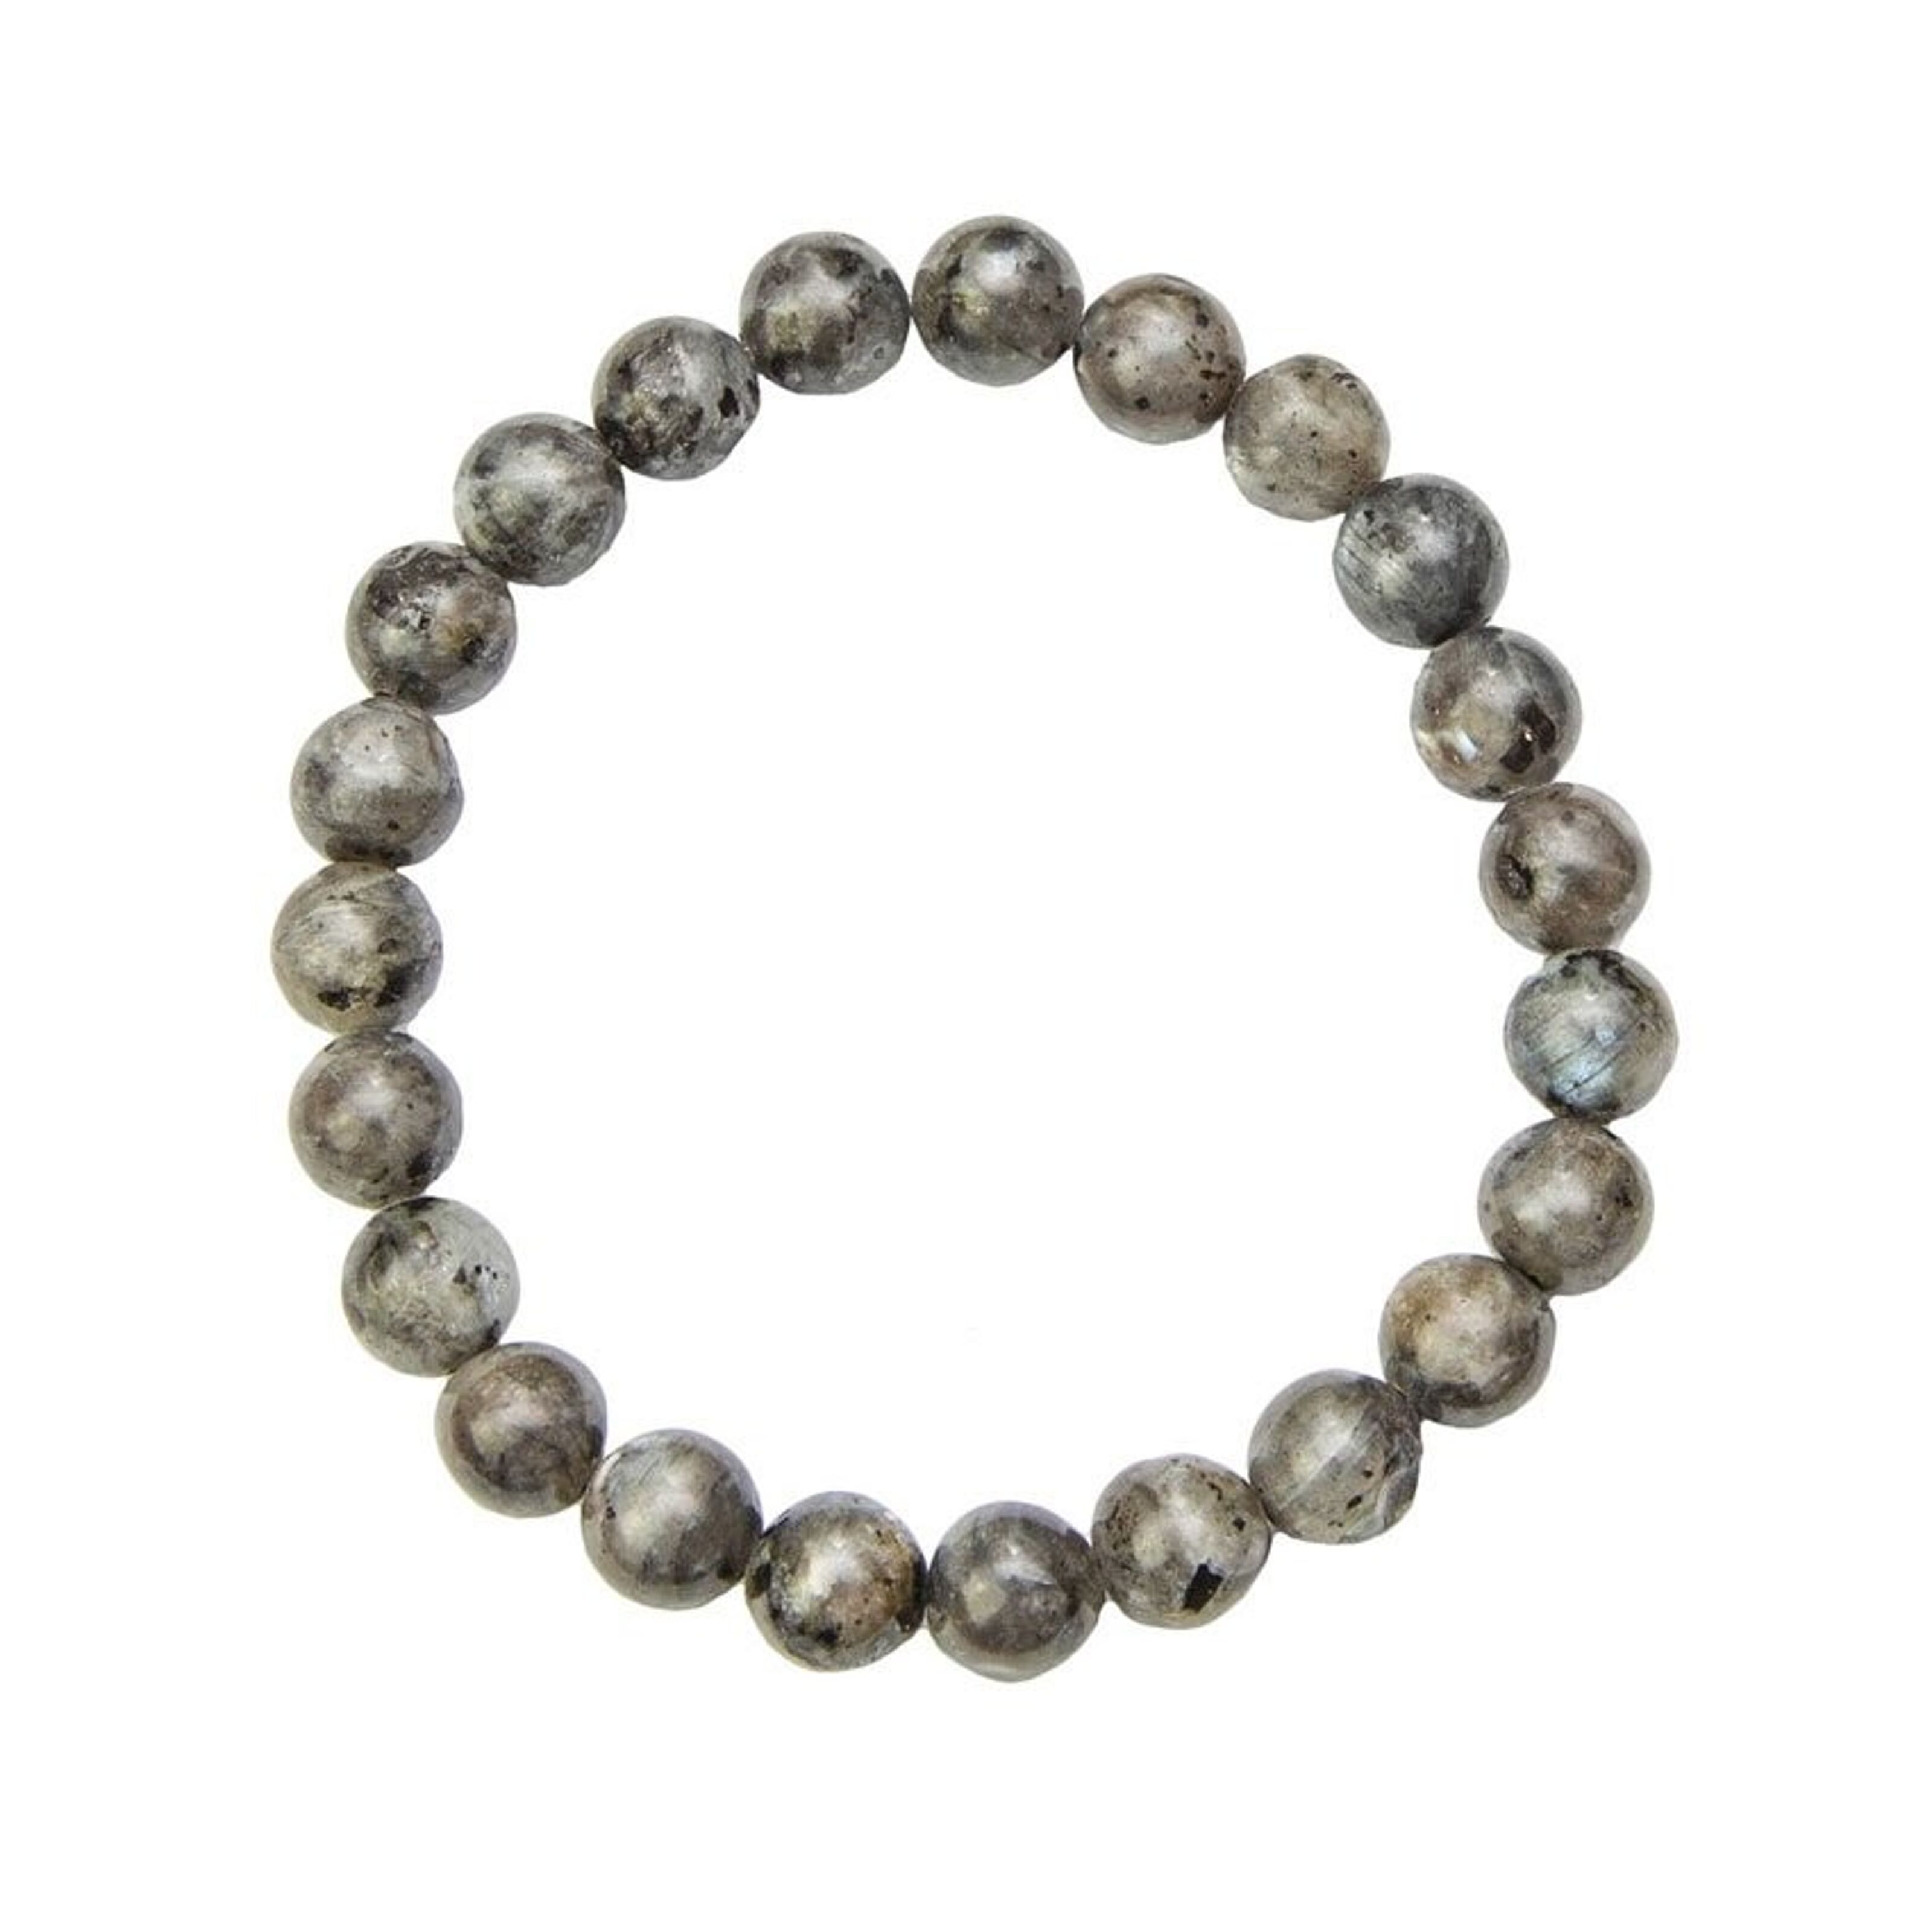 Buy wholesale Labradorite bracelet with inclusions - 8mm ball